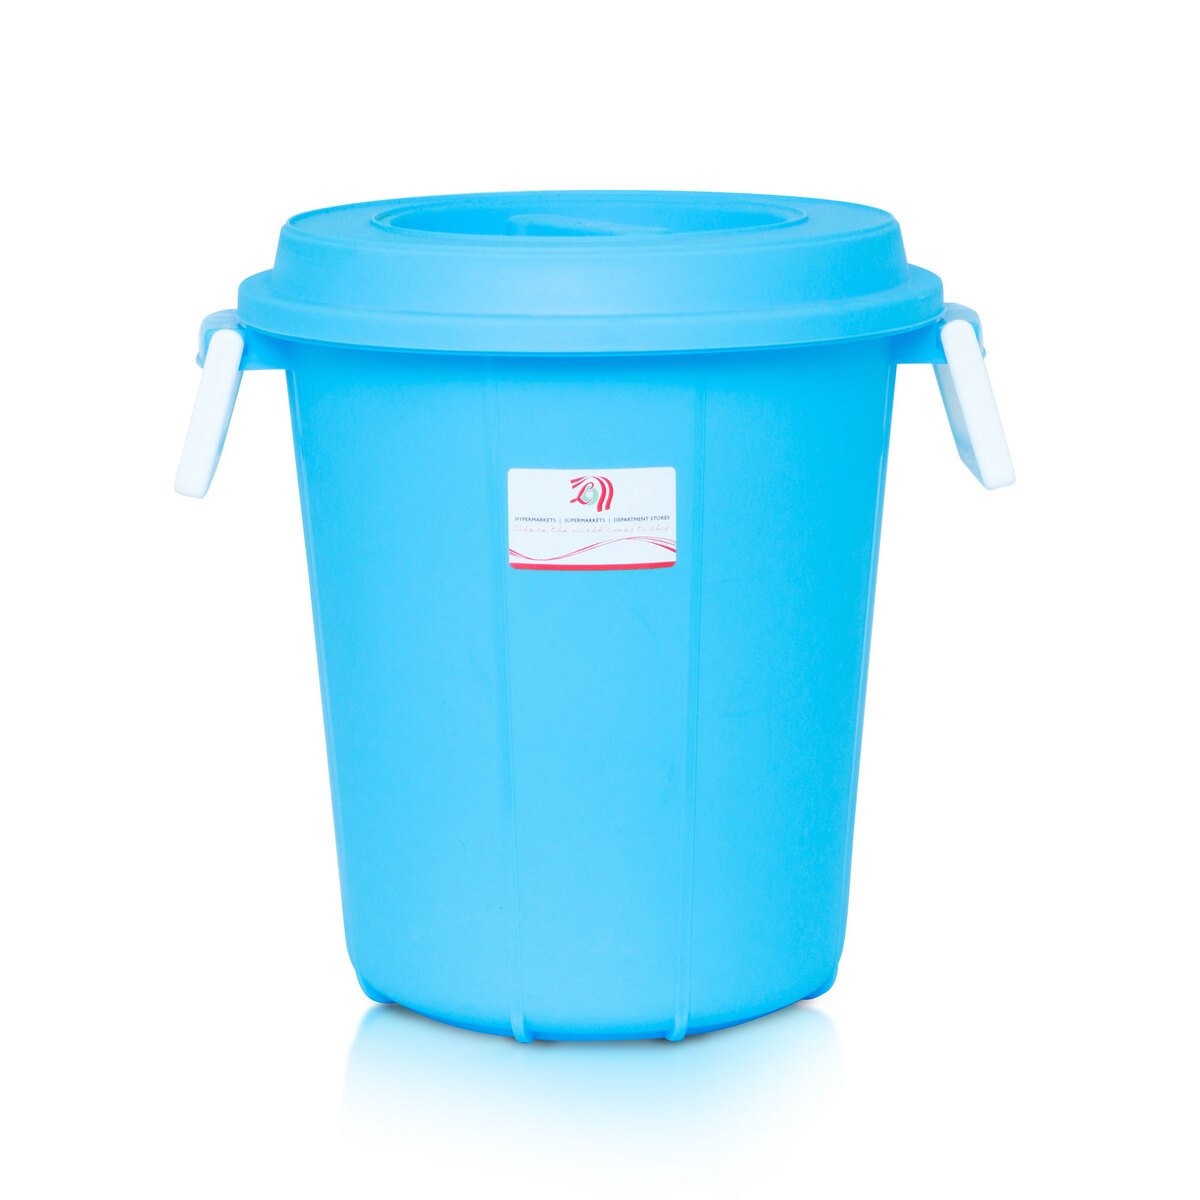 JCJ Drum Bucket With Lid 2012 35Ltr Assorted Color